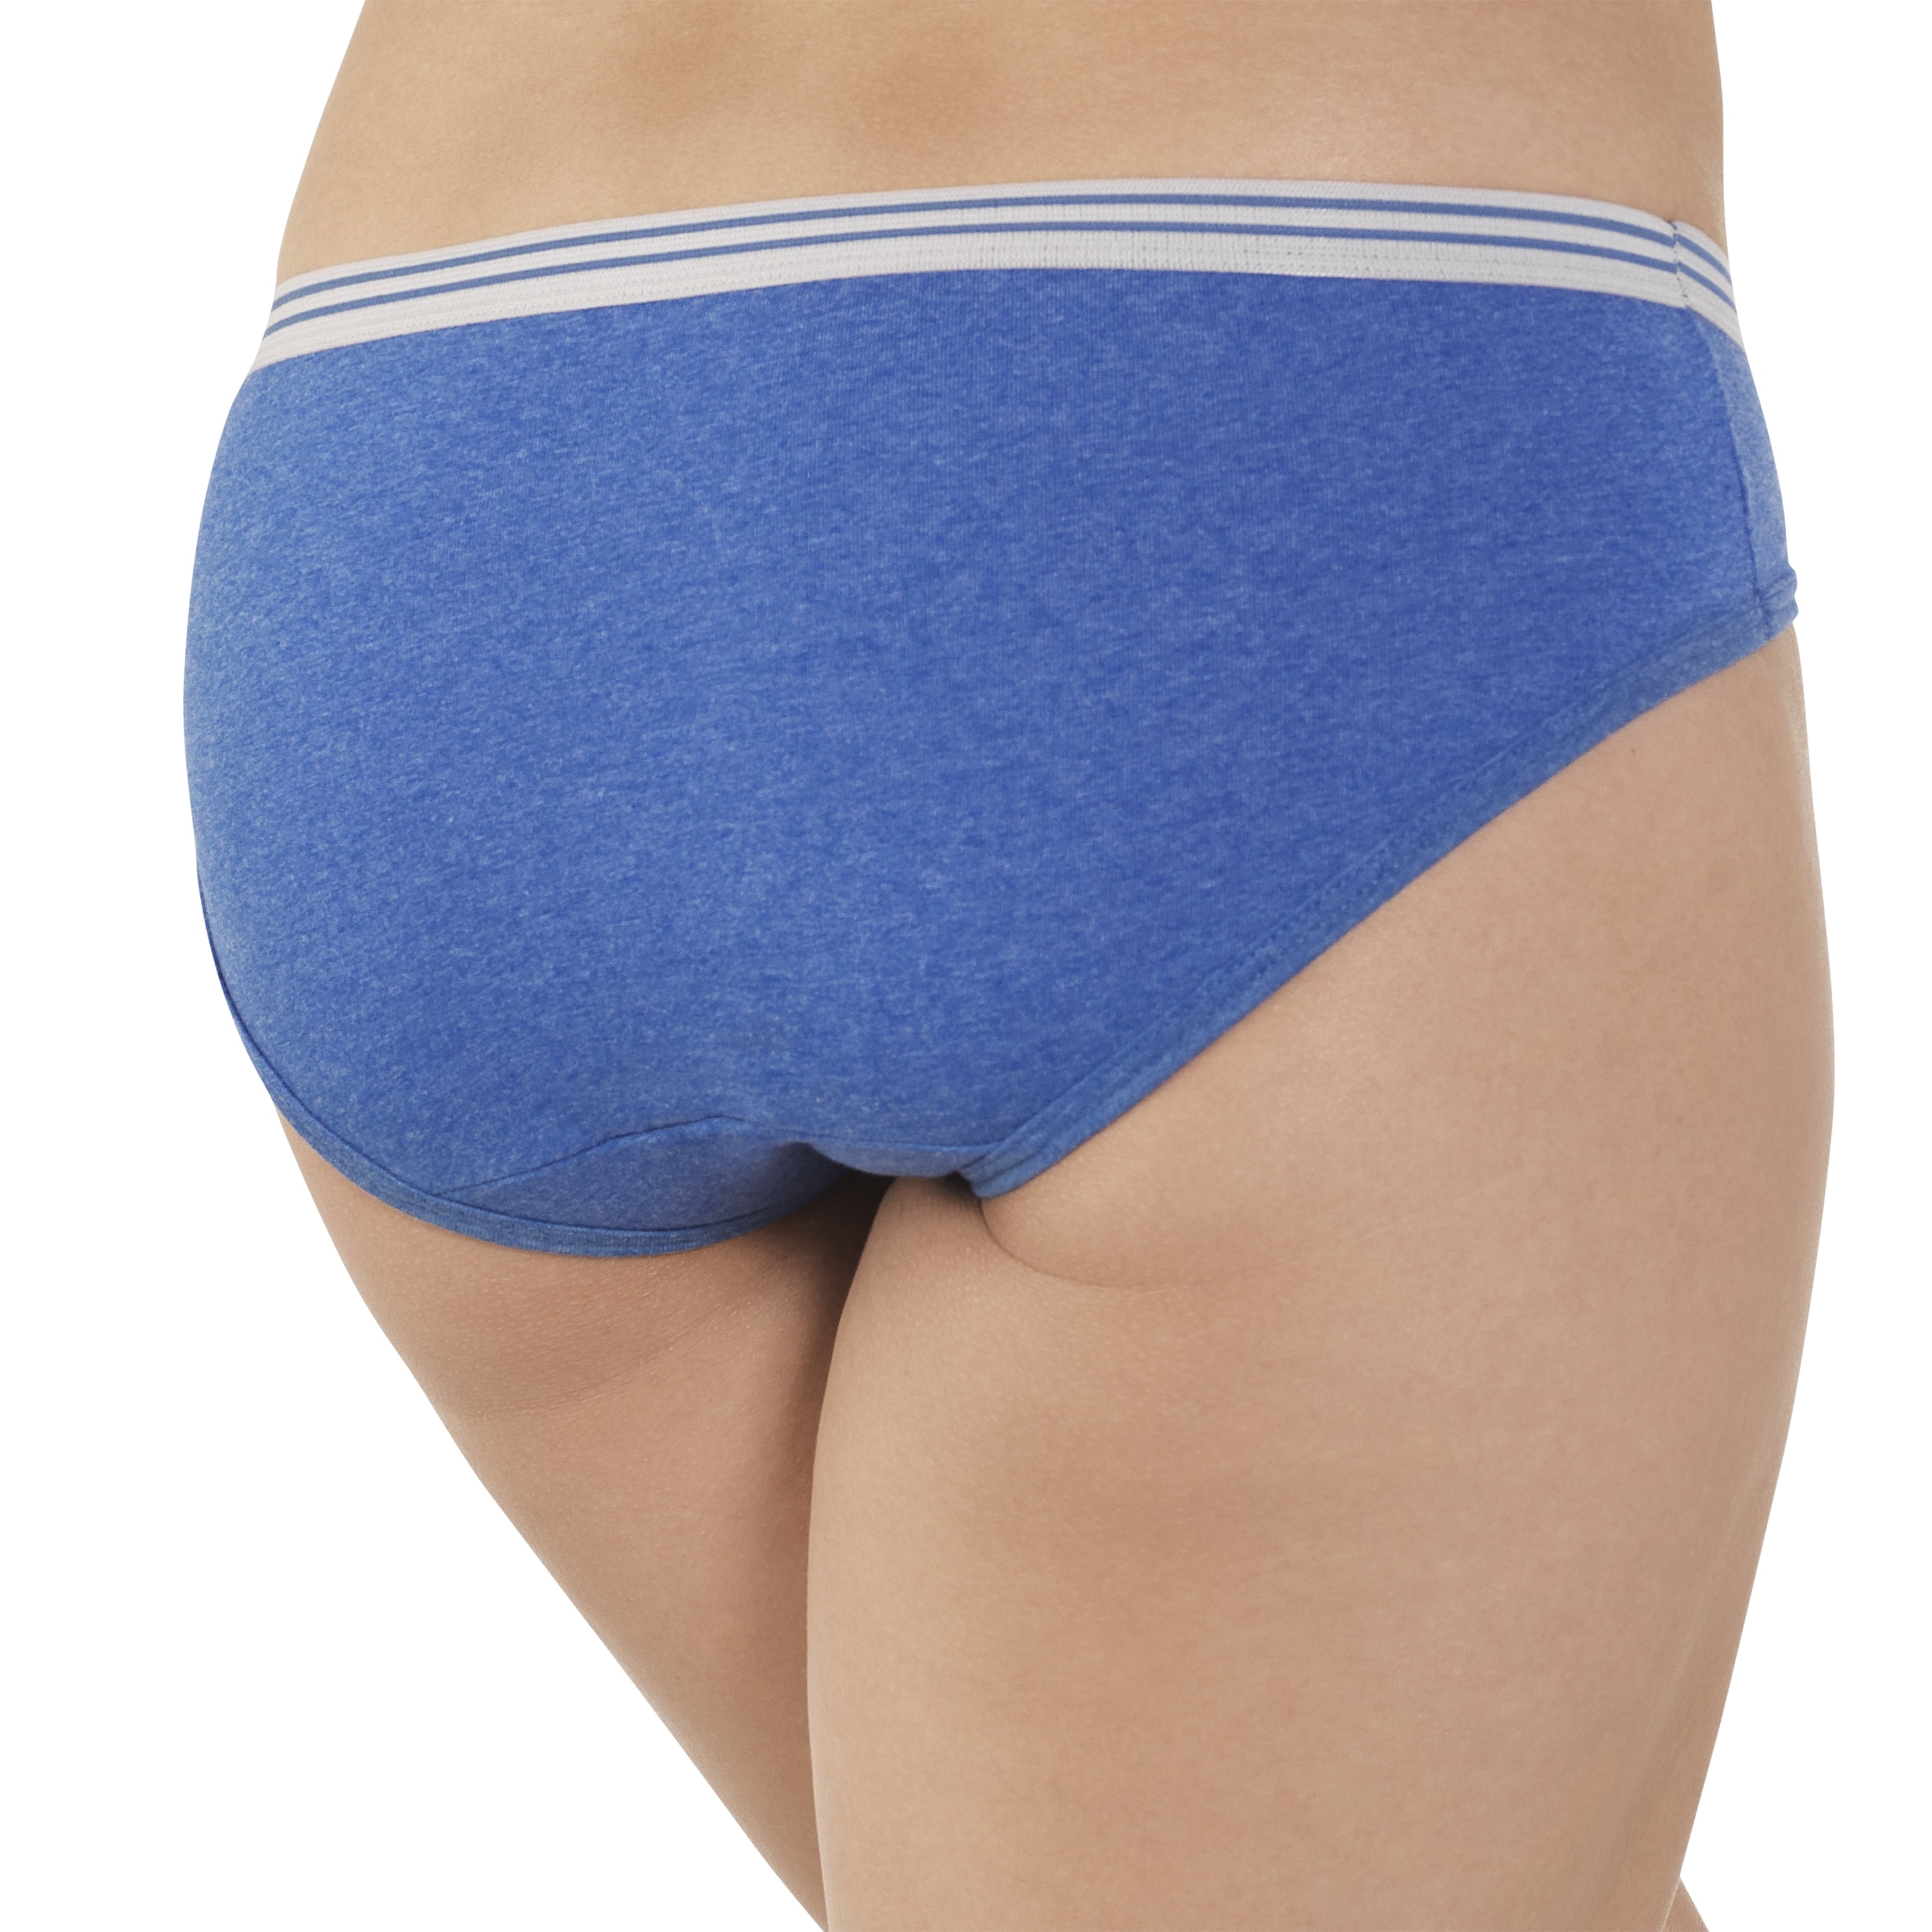 HONEYDEW HEATHER LOW RISE HIPSTER CHEEKY PANTY CUMULUS BLUE #581318 SMALL $12 